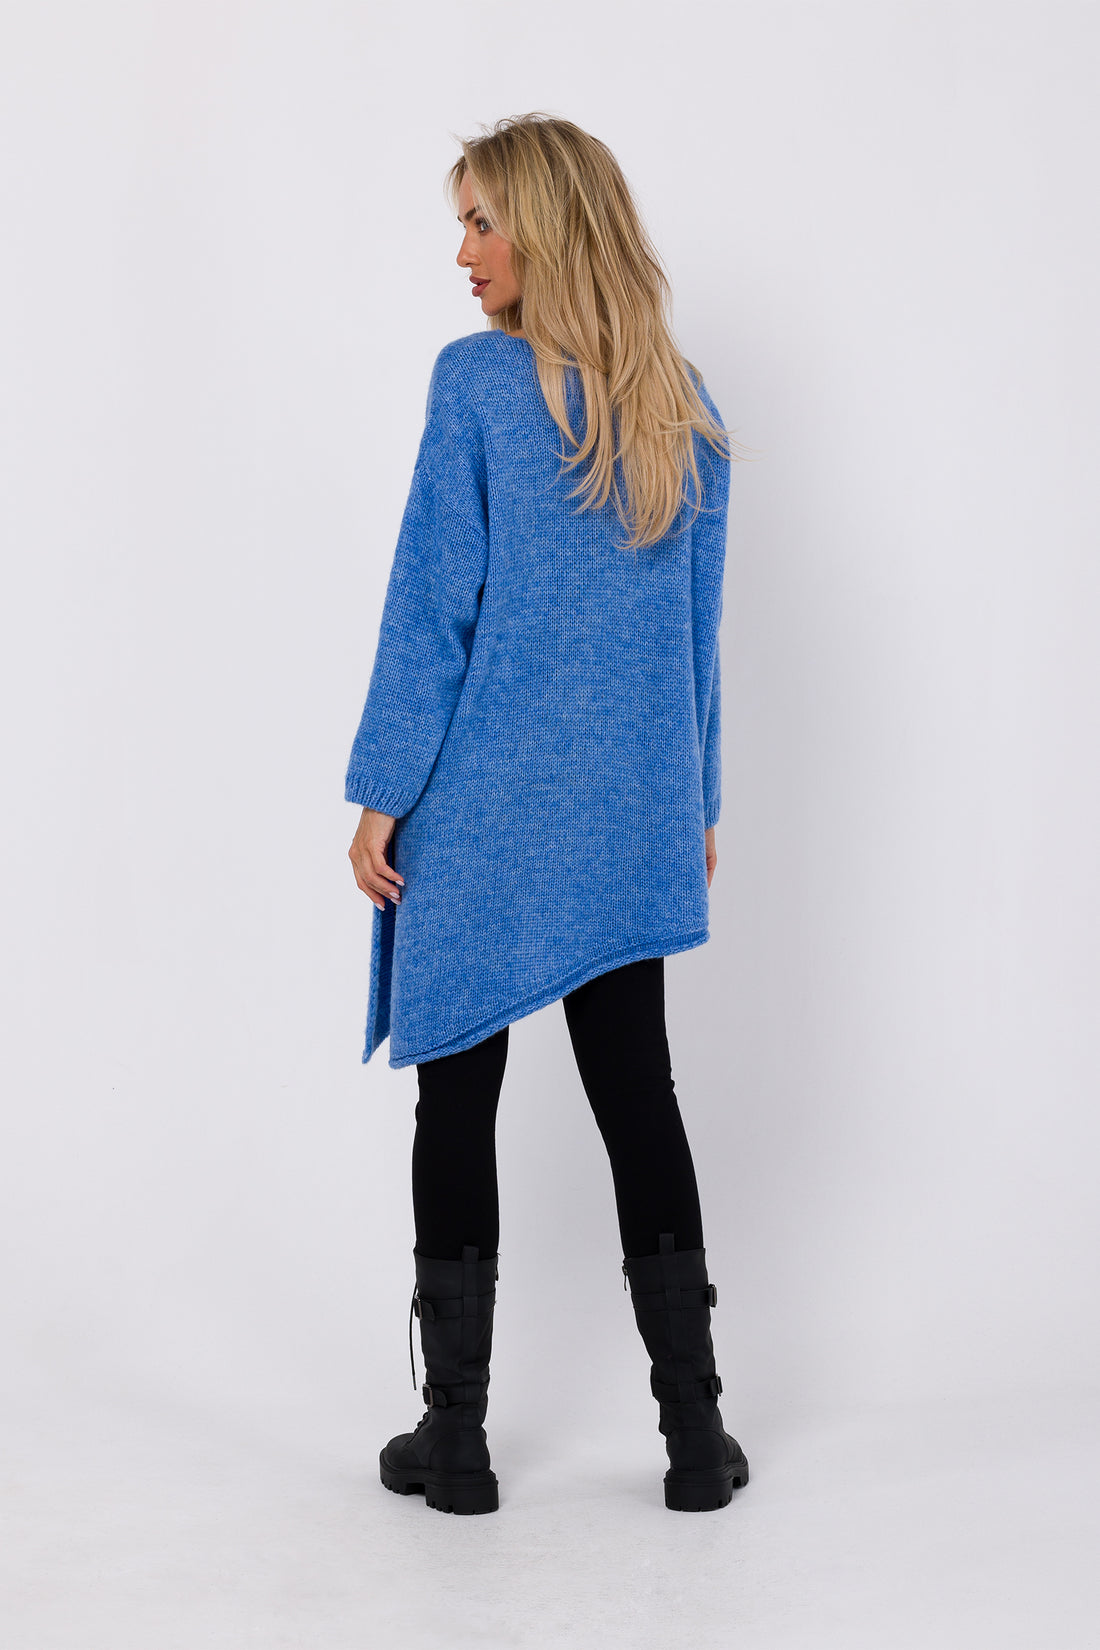 Experience the perfect blend of comfort and style with our Relaxed Fit Sweater Asymmetric. Crafted from open chunky knit, it boasts a relaxed fit with an asymmetric bottom hem and side split for modern flair. The long sleeves and deep V-shaped neckline add warmth and allure. This versatile piece can be worn as a classic pullover or transformed into a one-shoulder statement, making it a must-have for your winter wardrobe.